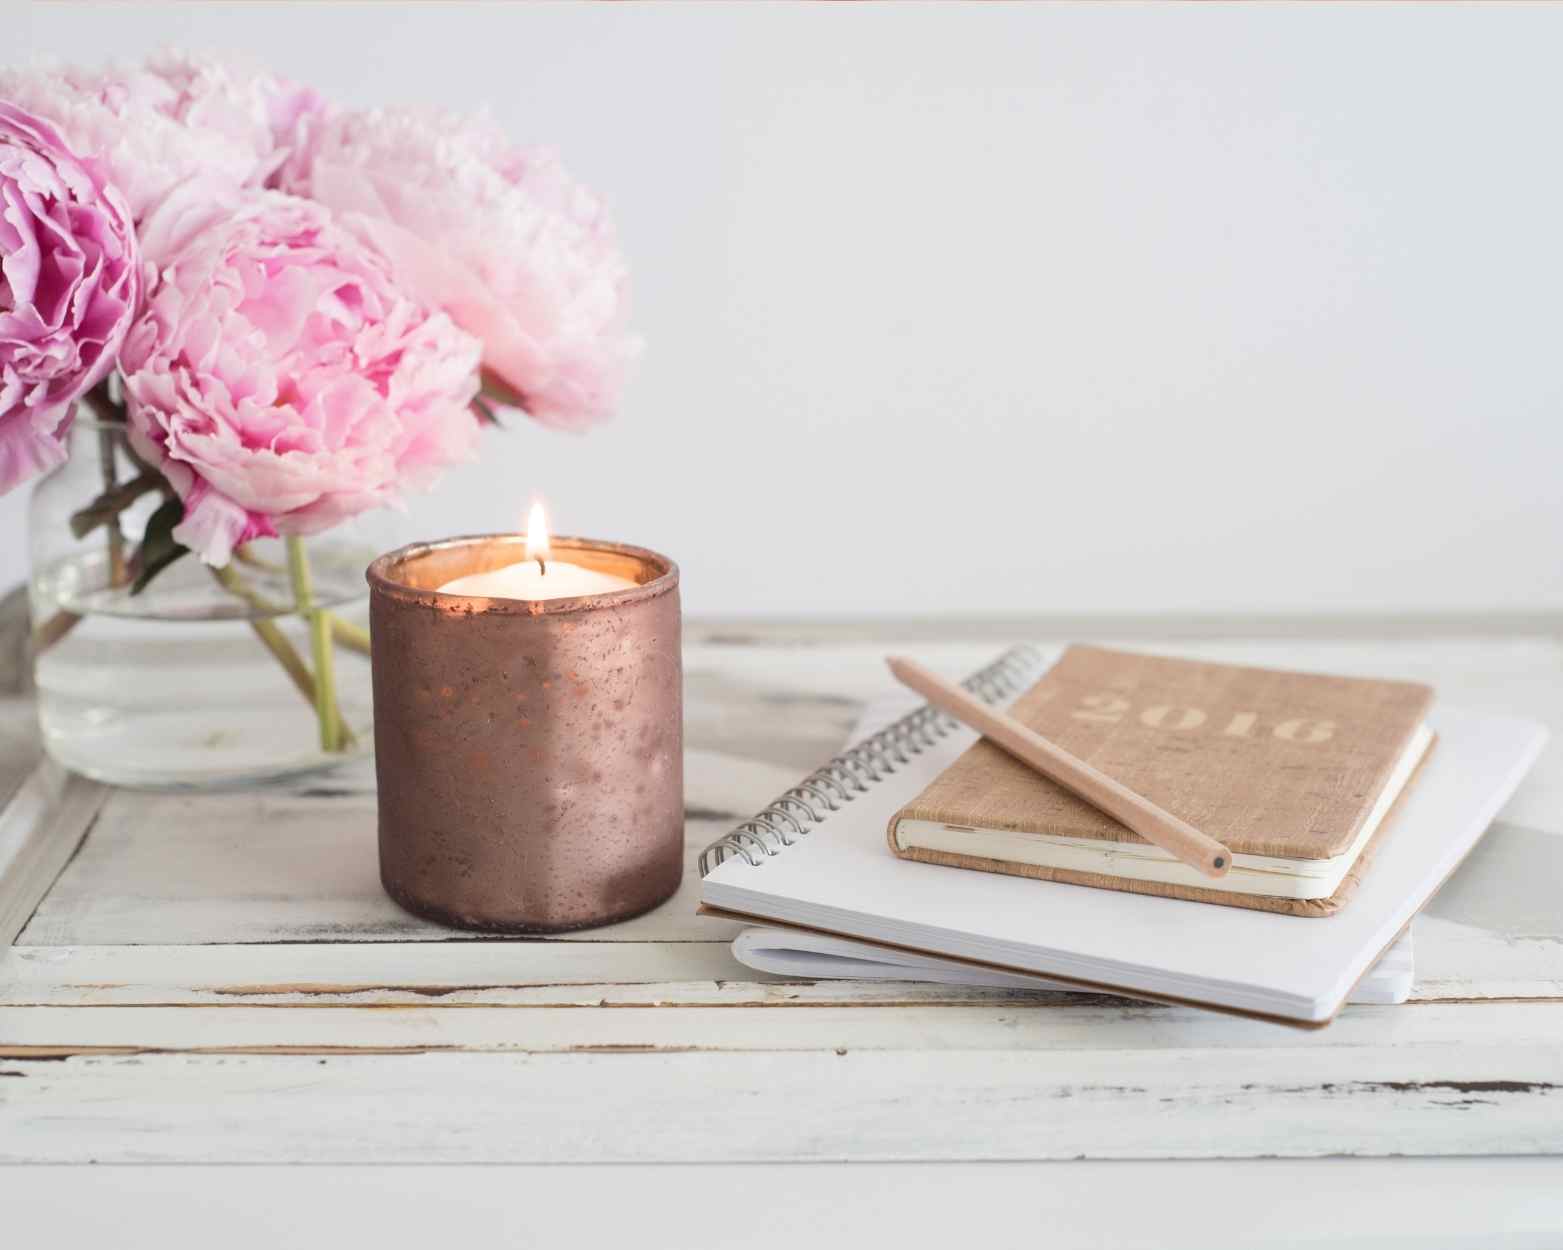 A natural organic beeswax candle on a table in a toxin free home.